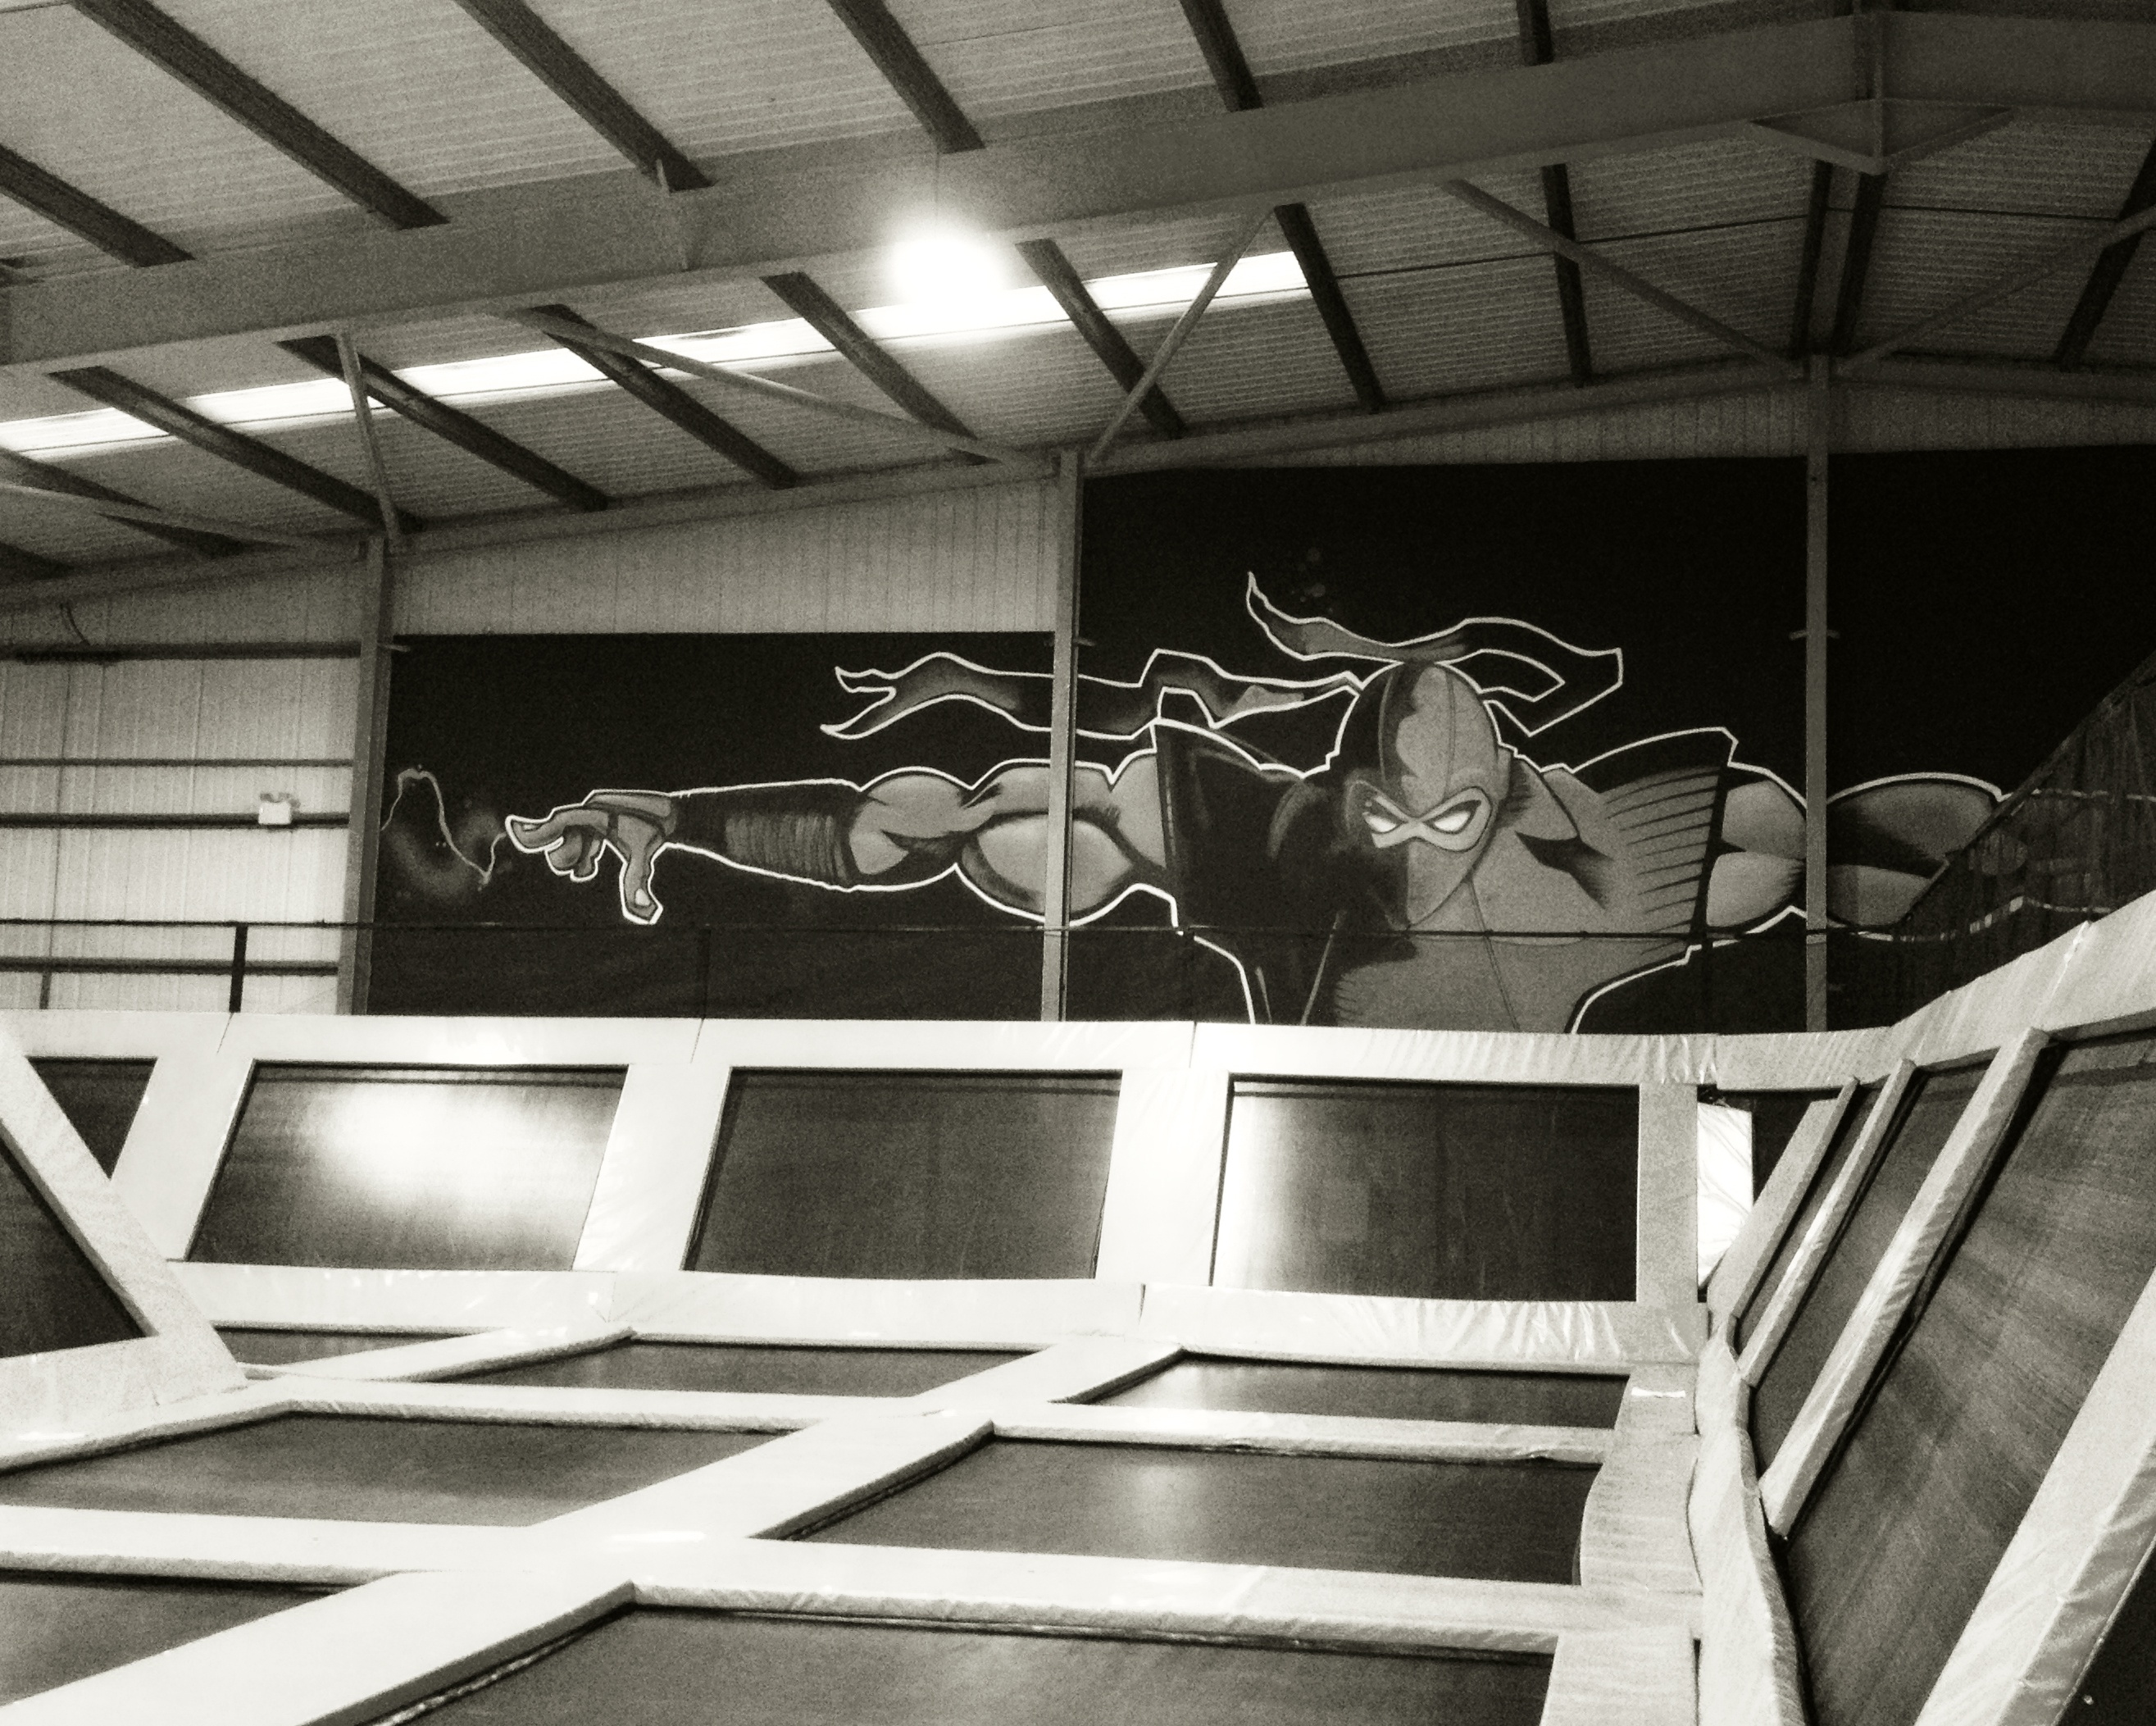 Flip Out Stoke Indoor Trampoline Arena Croft Architecture